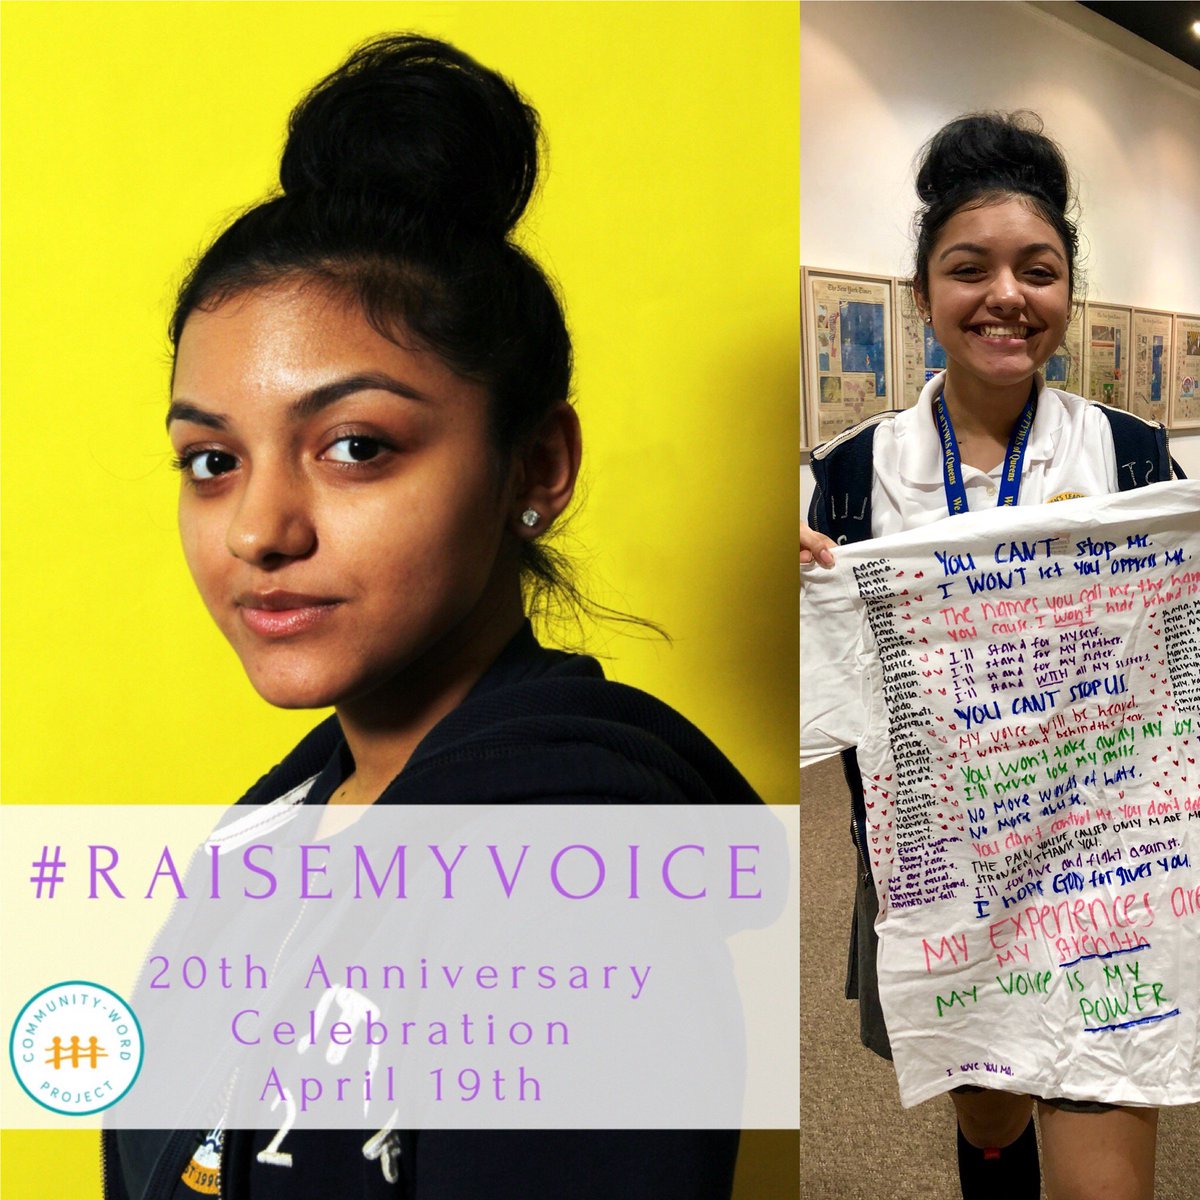 'My Voice is My Power' Meet Racquel, 9th grader at #TYWLSQueens. Join us on April 19th for a 20th Anniversary Celebration to help raise Racquel's voice and the thousands of other #students CWP serves across #NYC. Tickets: bit.ly/2qcEax2 #RaiseMyVoice #artsed #CWPNYC20